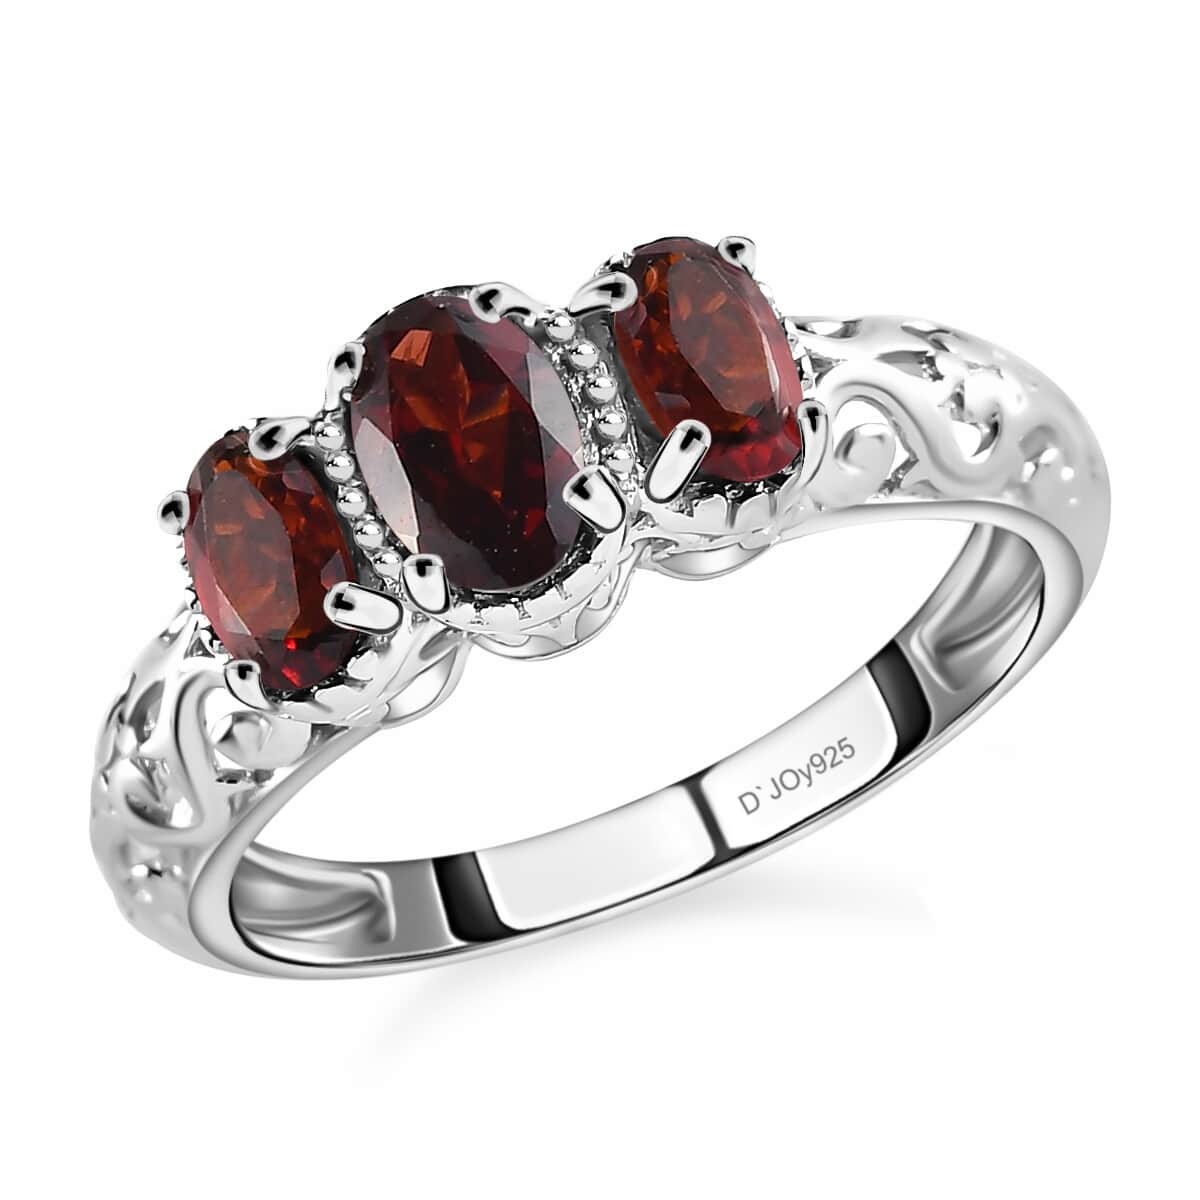 Garnet Ring, 3 Stone Garnet Ring, Trilogy Ring, Sterling Silver Ring, Birthstone Jewelry, Mozambique Garnet 3 Stone Ring 1.15 ctw (Size 7.0) image number 0